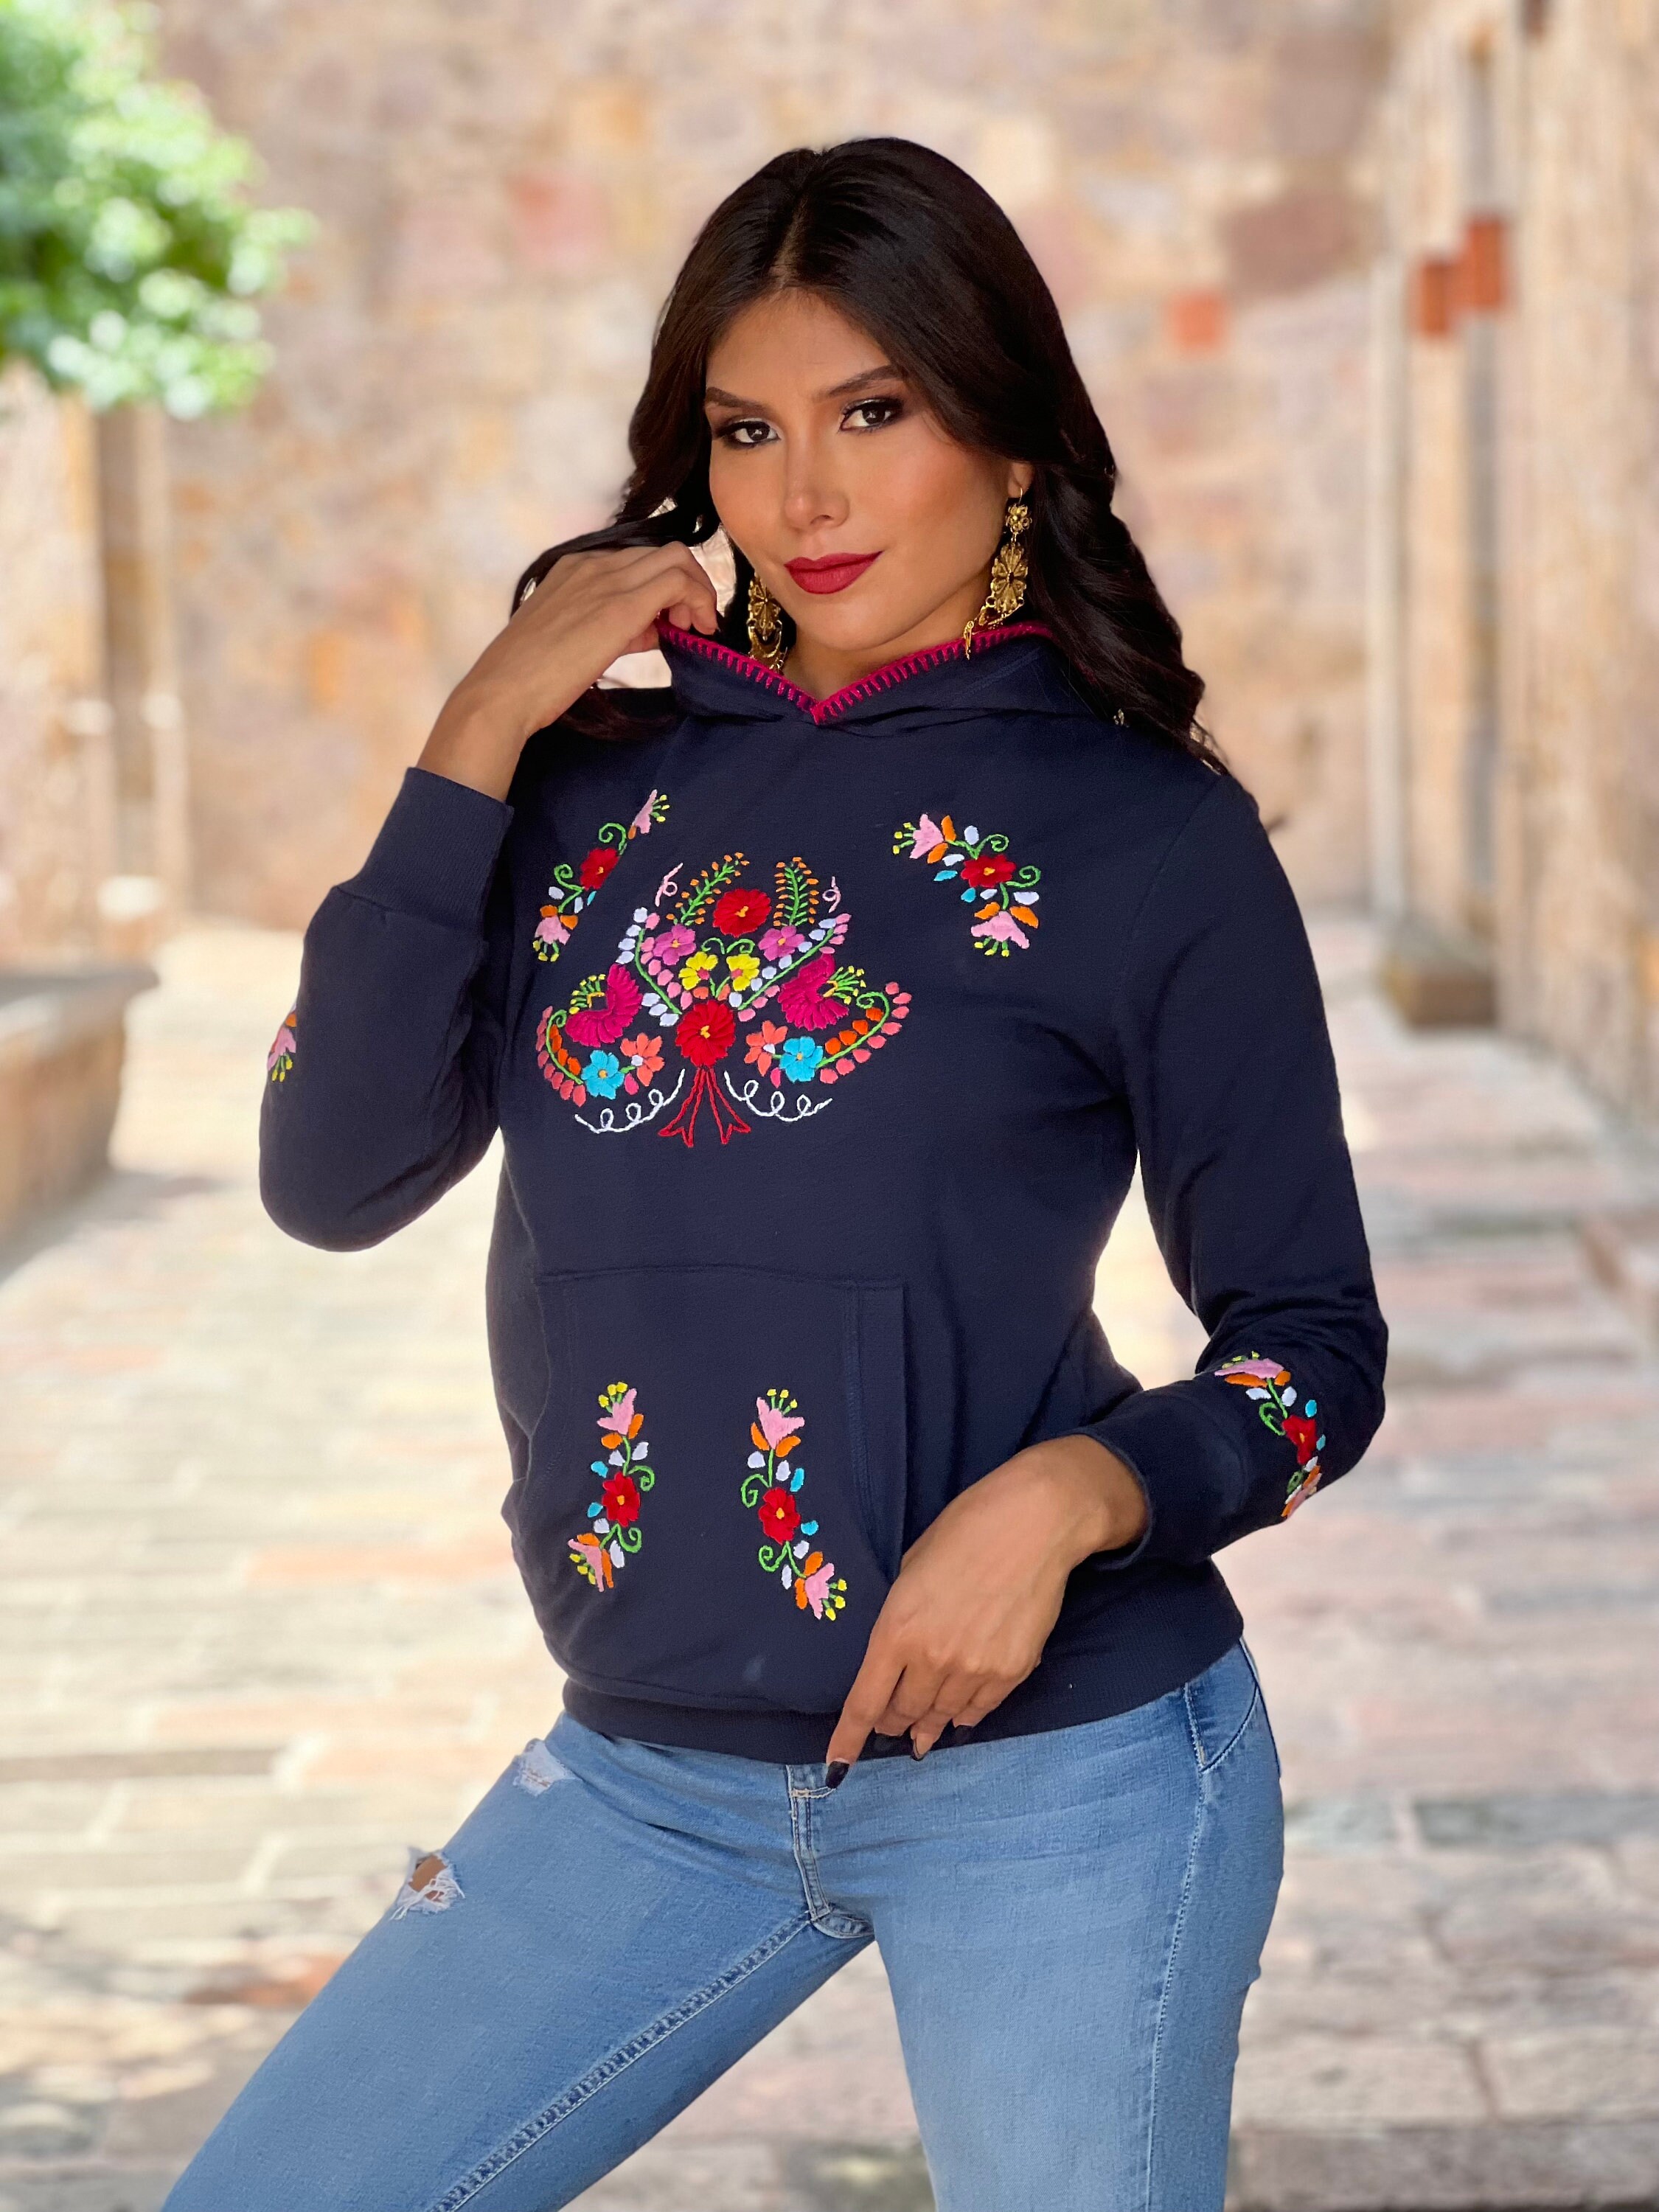 Artisanal Sweatshirt Made in Mexico. Size S 2X. Floral - Etsy